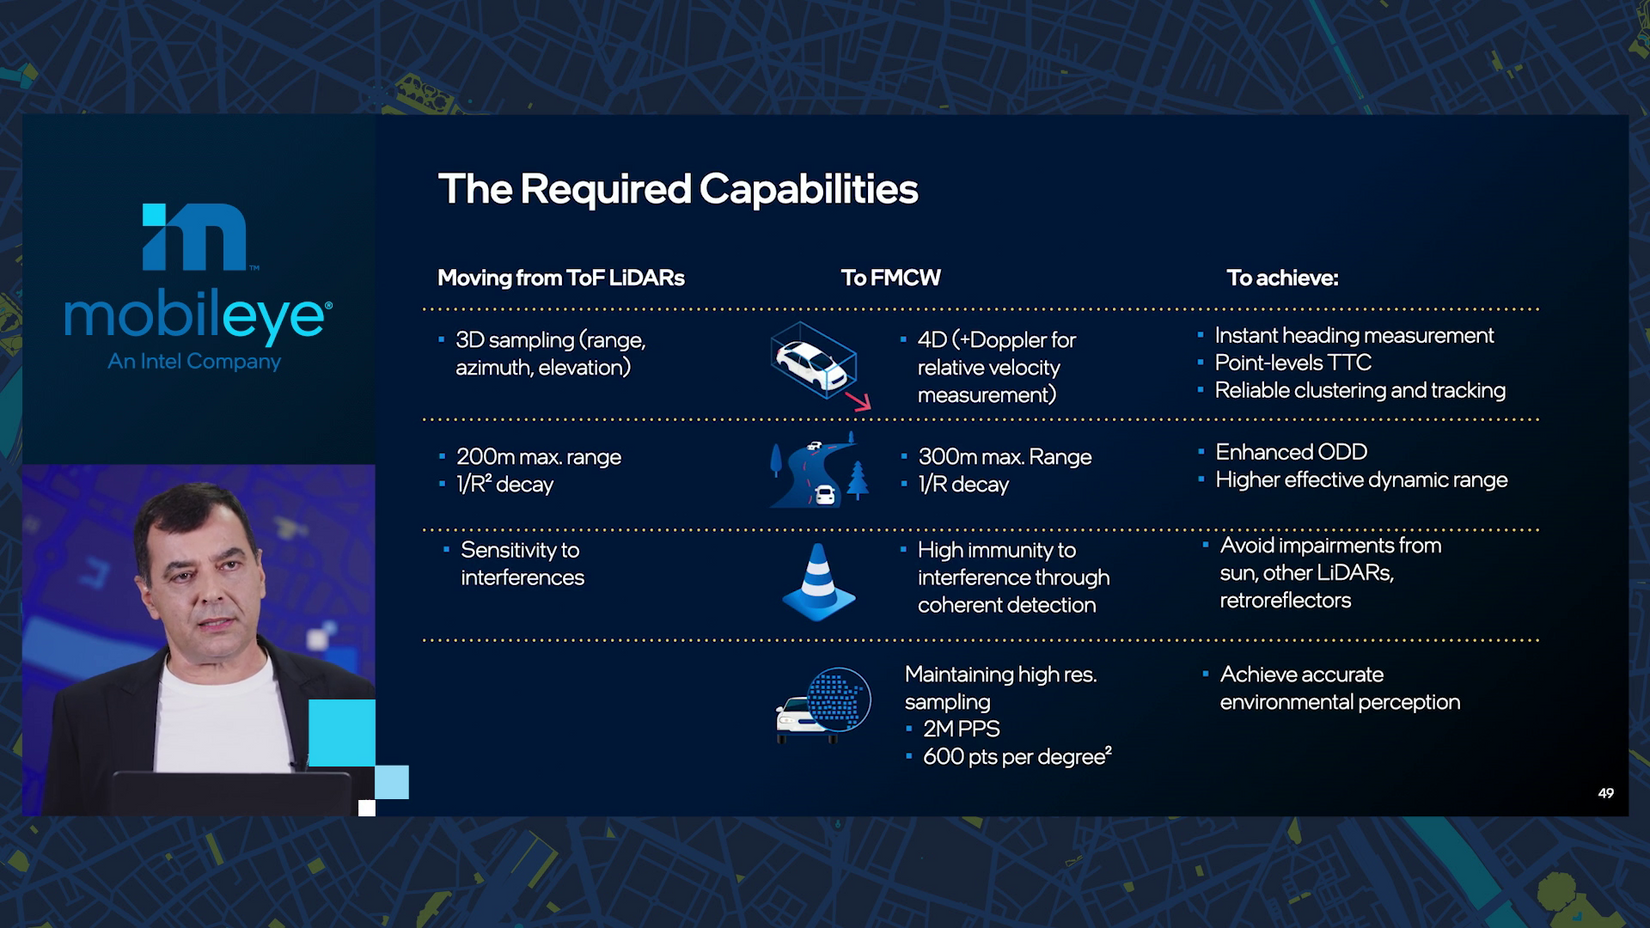 The required capabilities for FMCW LiDARs